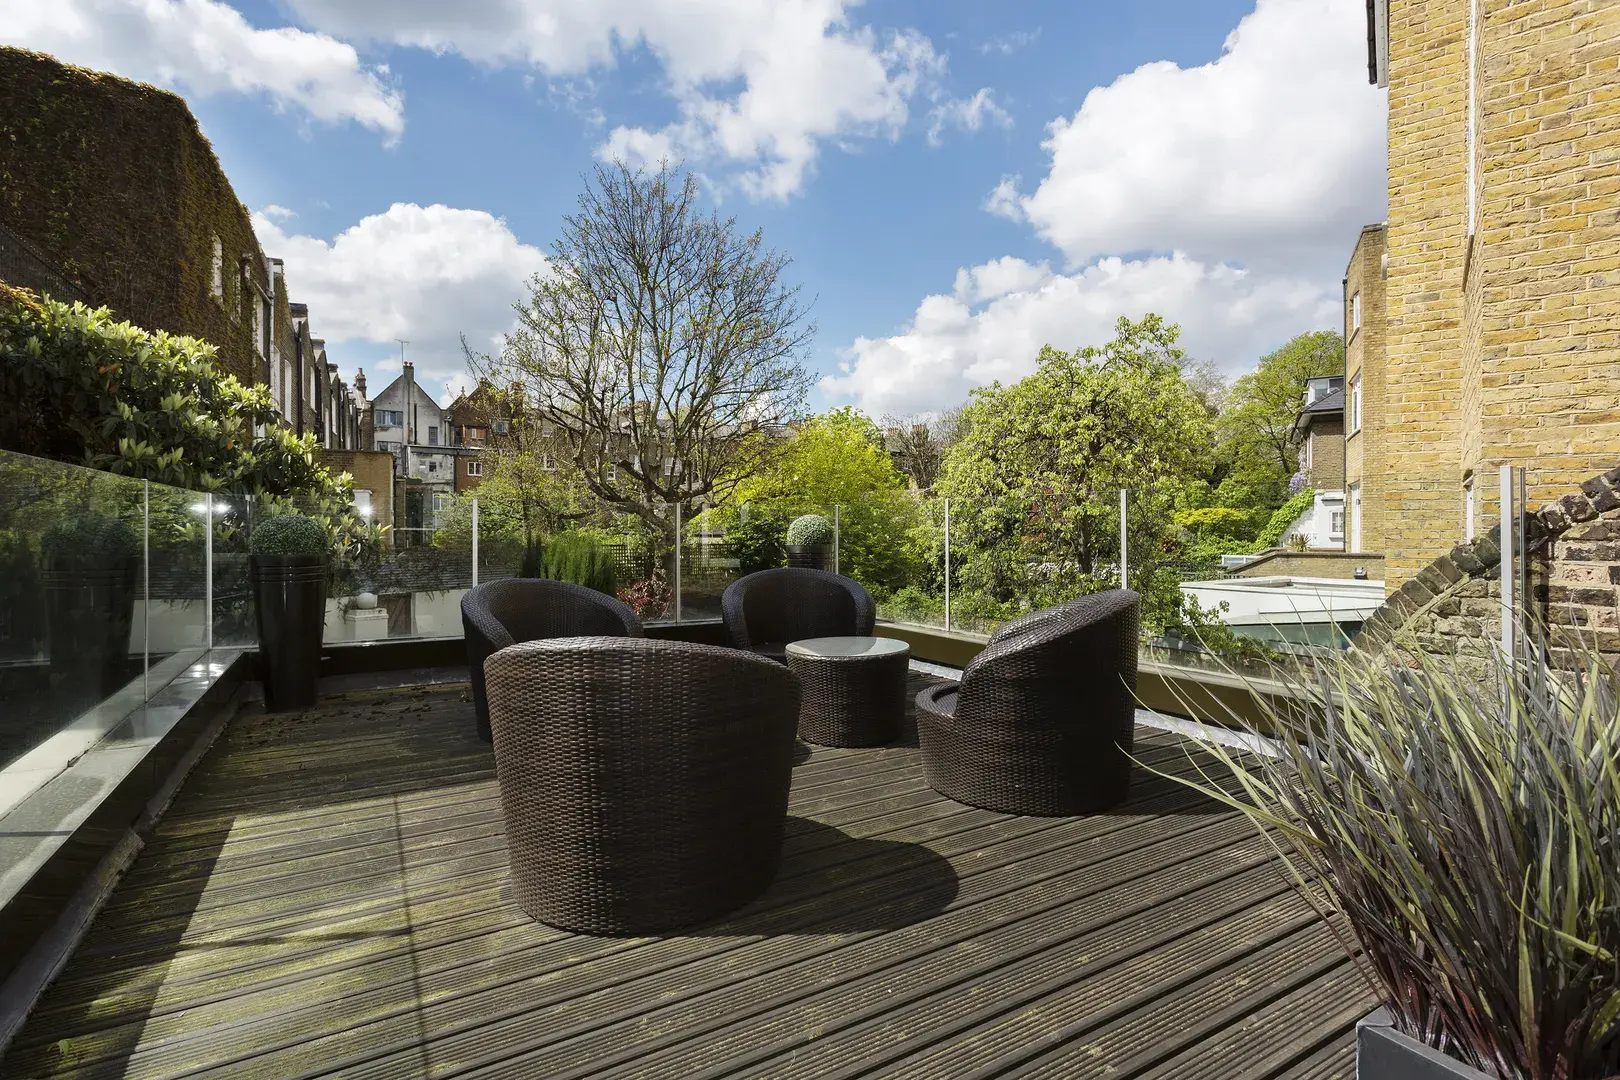 Addison Road, holiday home in Kensington, London